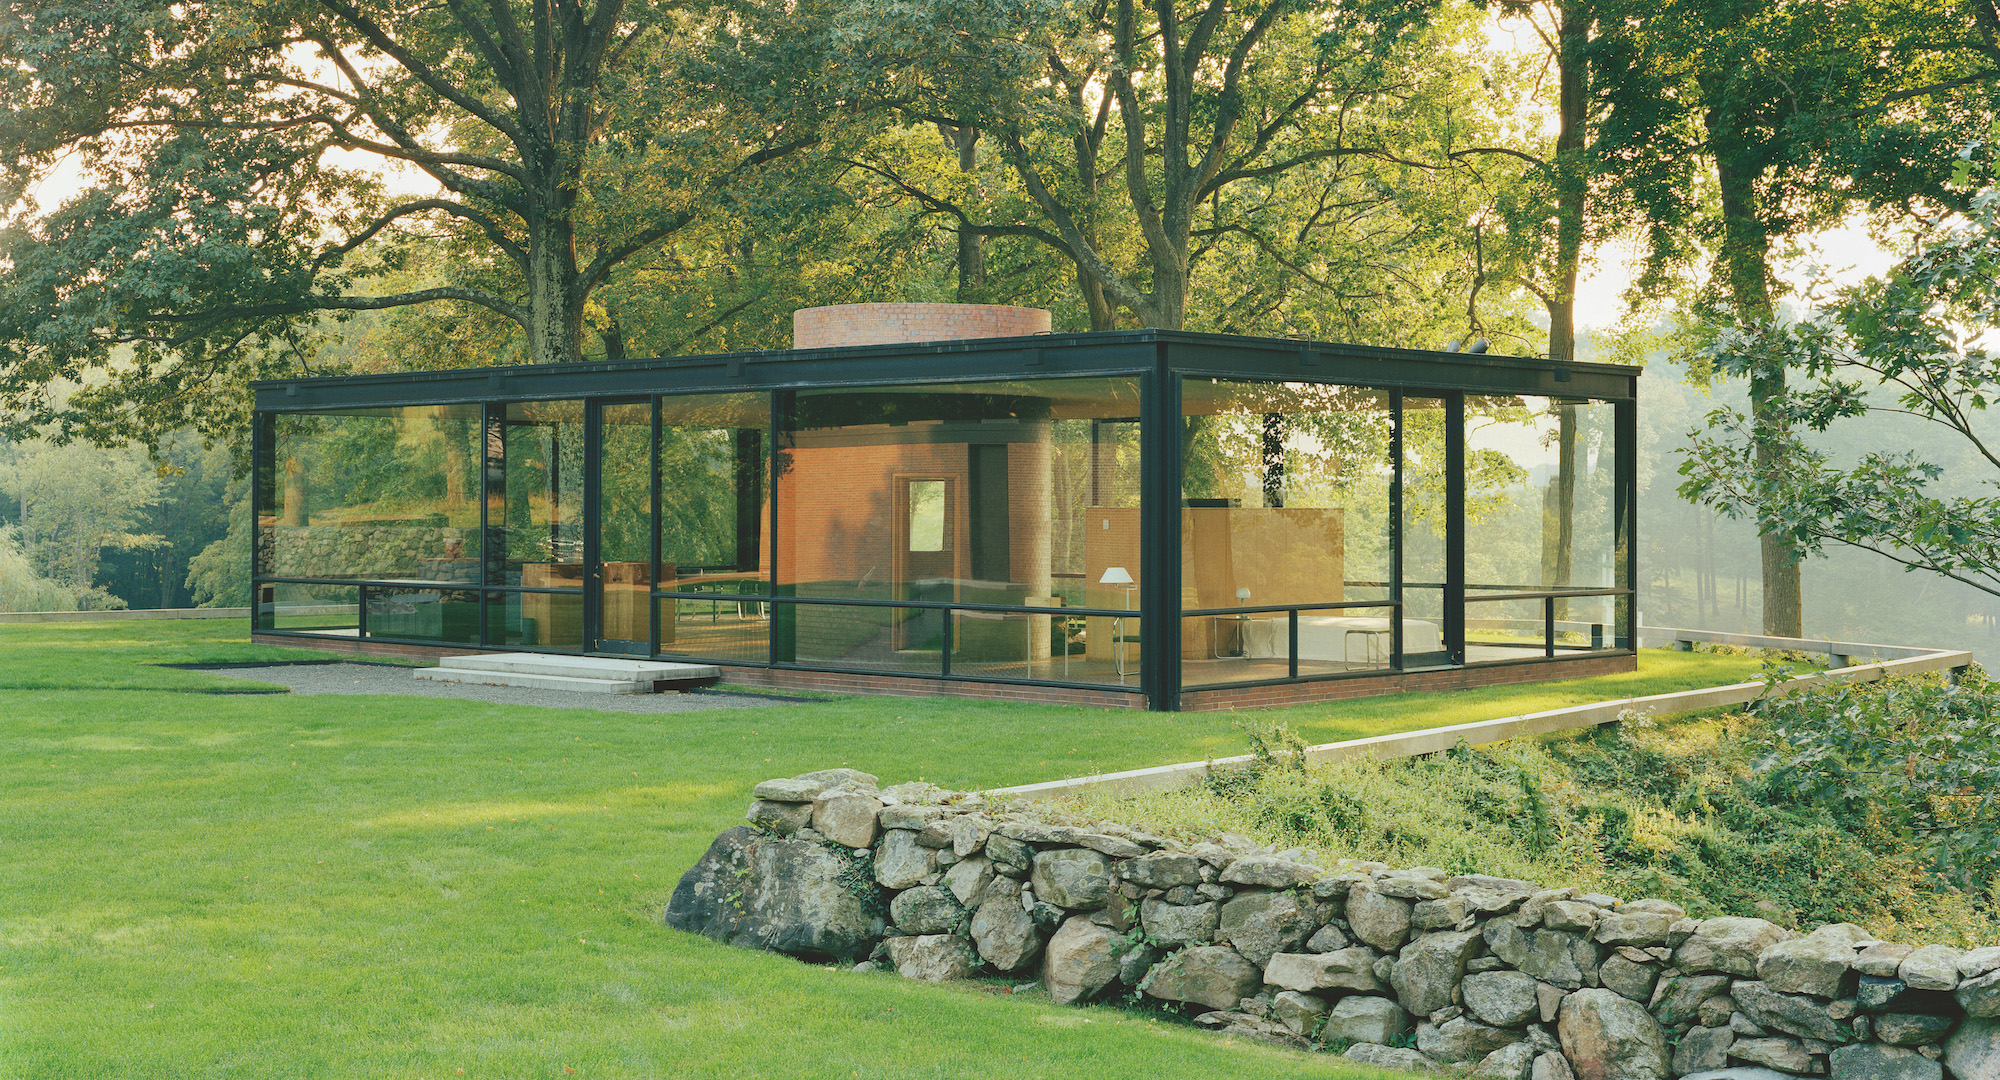 Glass House in New Canaan, Connecticut was completed in 1949 by architect Philip Johnson From “Glass Houses” published by Phaidon - Effect Magazine - Effetto